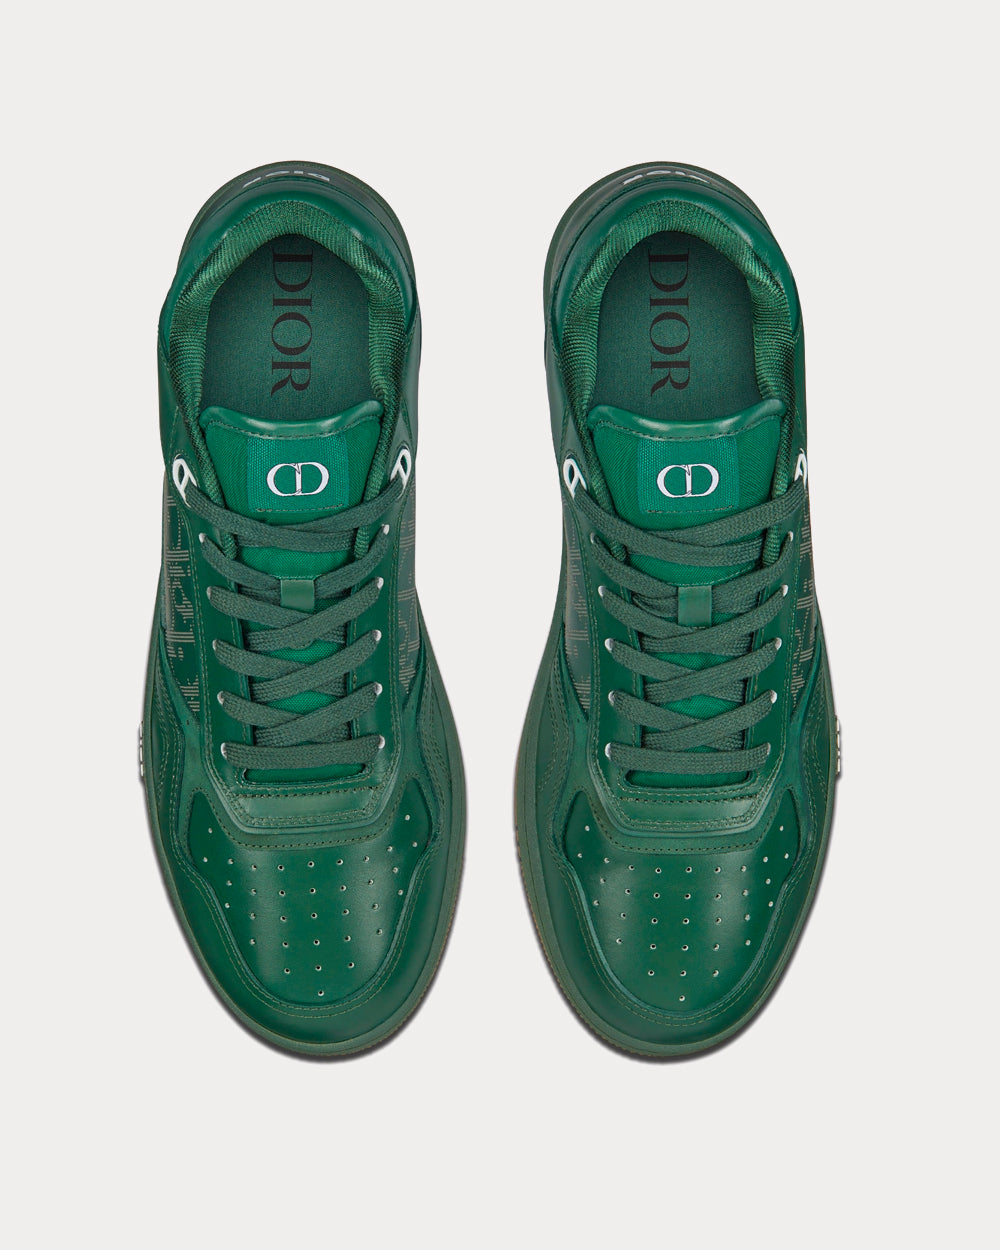 Dior - World Tour B27 Green Dior Oblique Galaxy Leather with Smooth Calfskin and Suede Low Top Sneakers